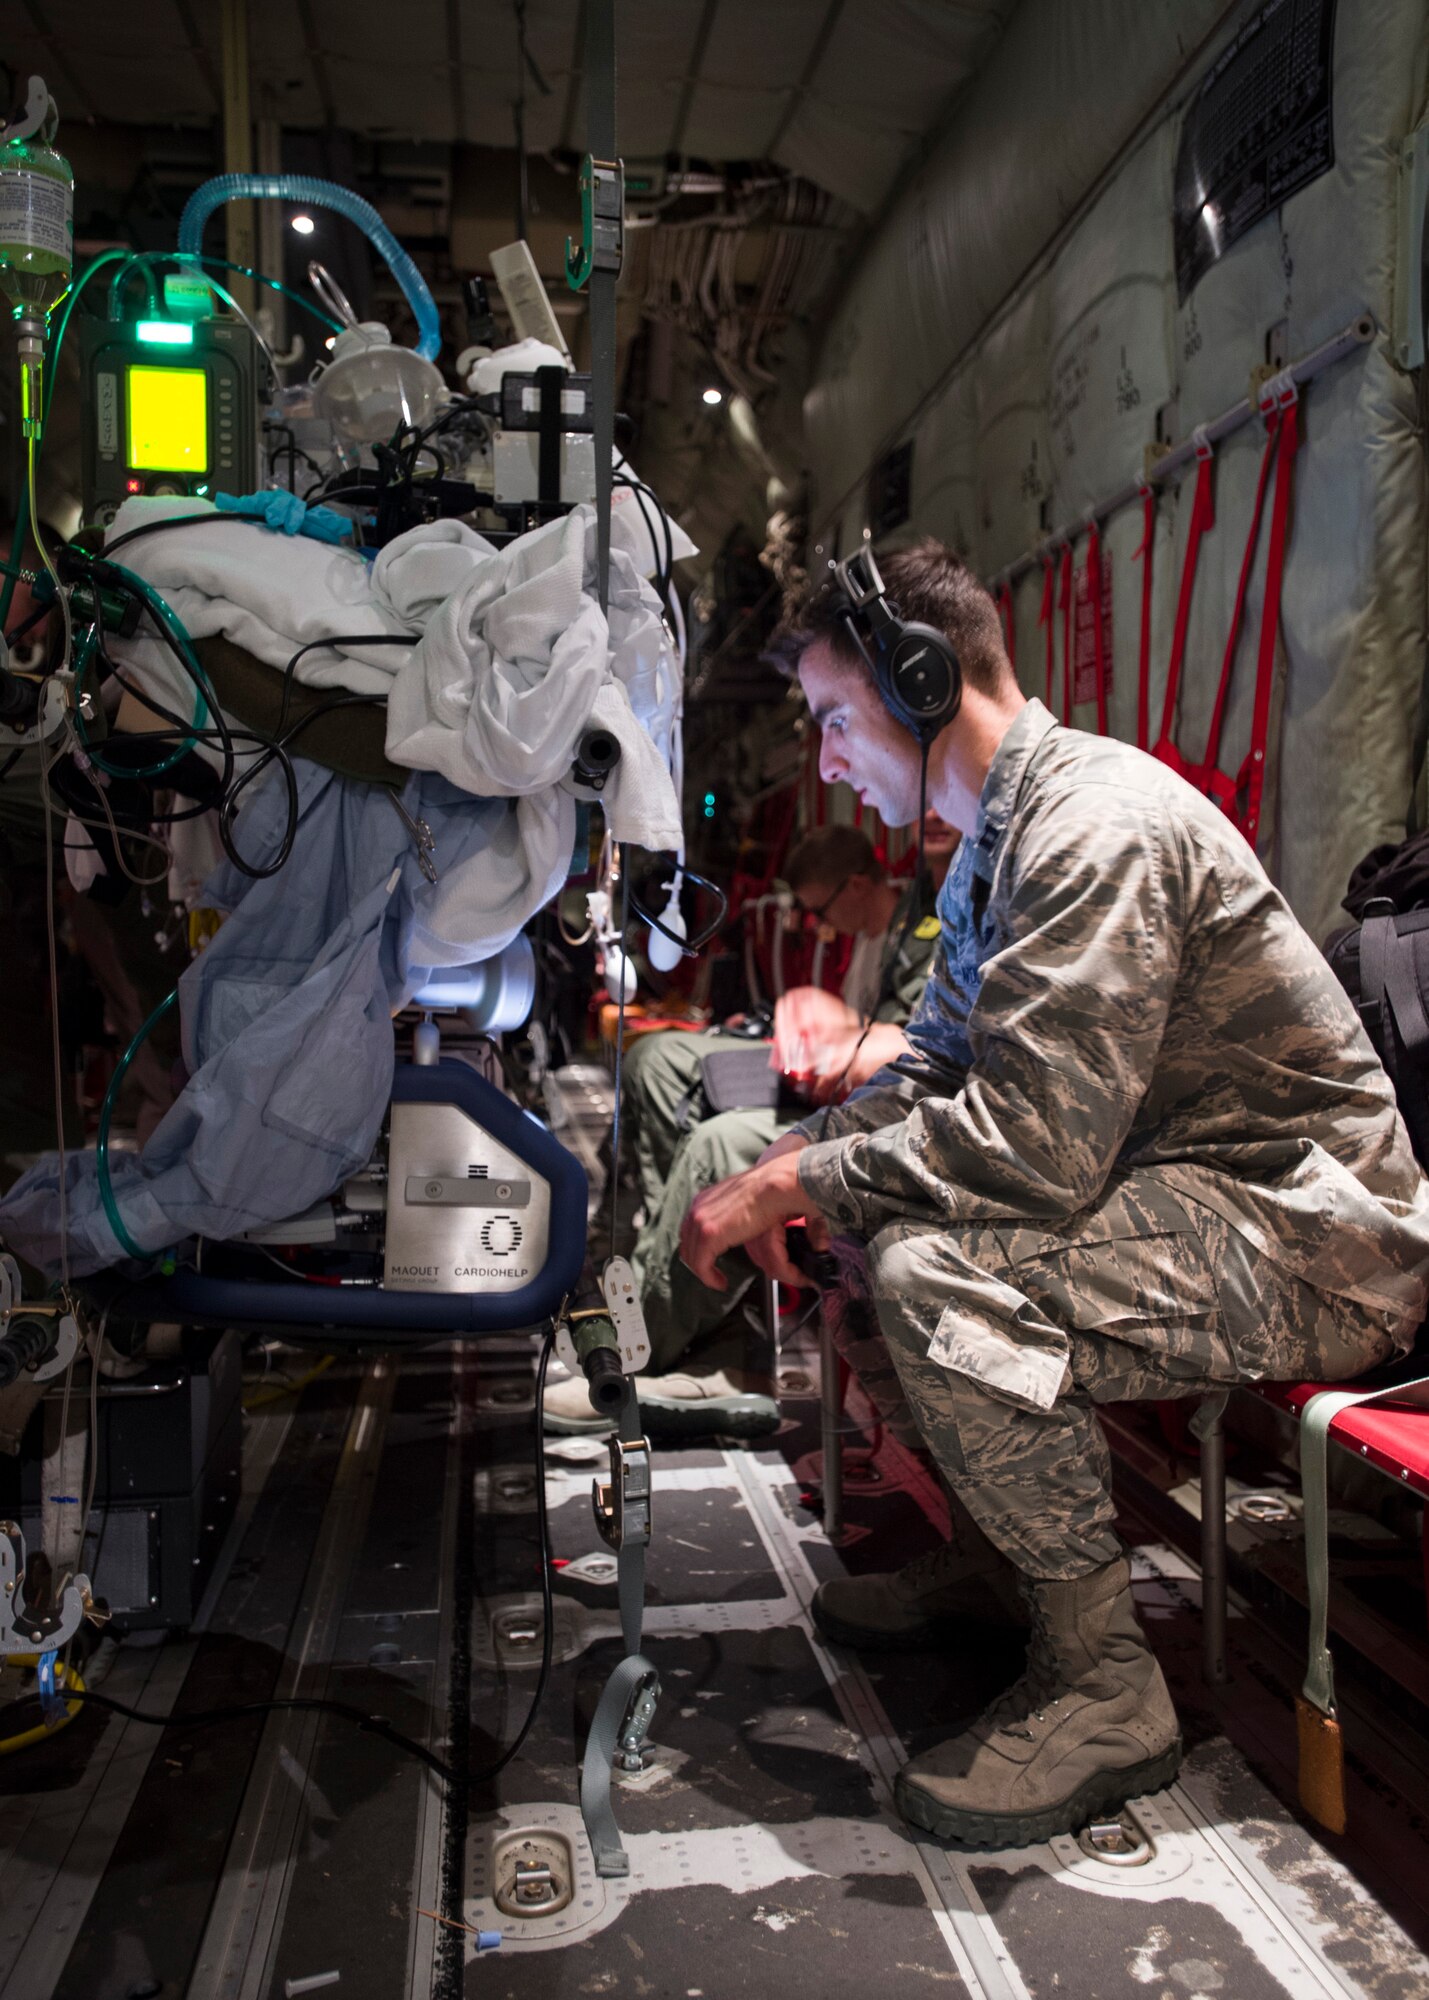 Capt. Jeffrey Dellavolpe, 959th Medical Operations Squadron critical care physician, regulates the Extracorporeal Membrane Oxygenation system during a flight to San Antonio Military Medical Center, Joint Base San Antonio-Fort Sam Houston, Texas. ECMO is a heart-lung bypass system that circulates blood through an external artificial lung and sends it back into the patient’s bloodstream. (U.S. Air Force photo/Staff Sgt. Kevin Iinuma)